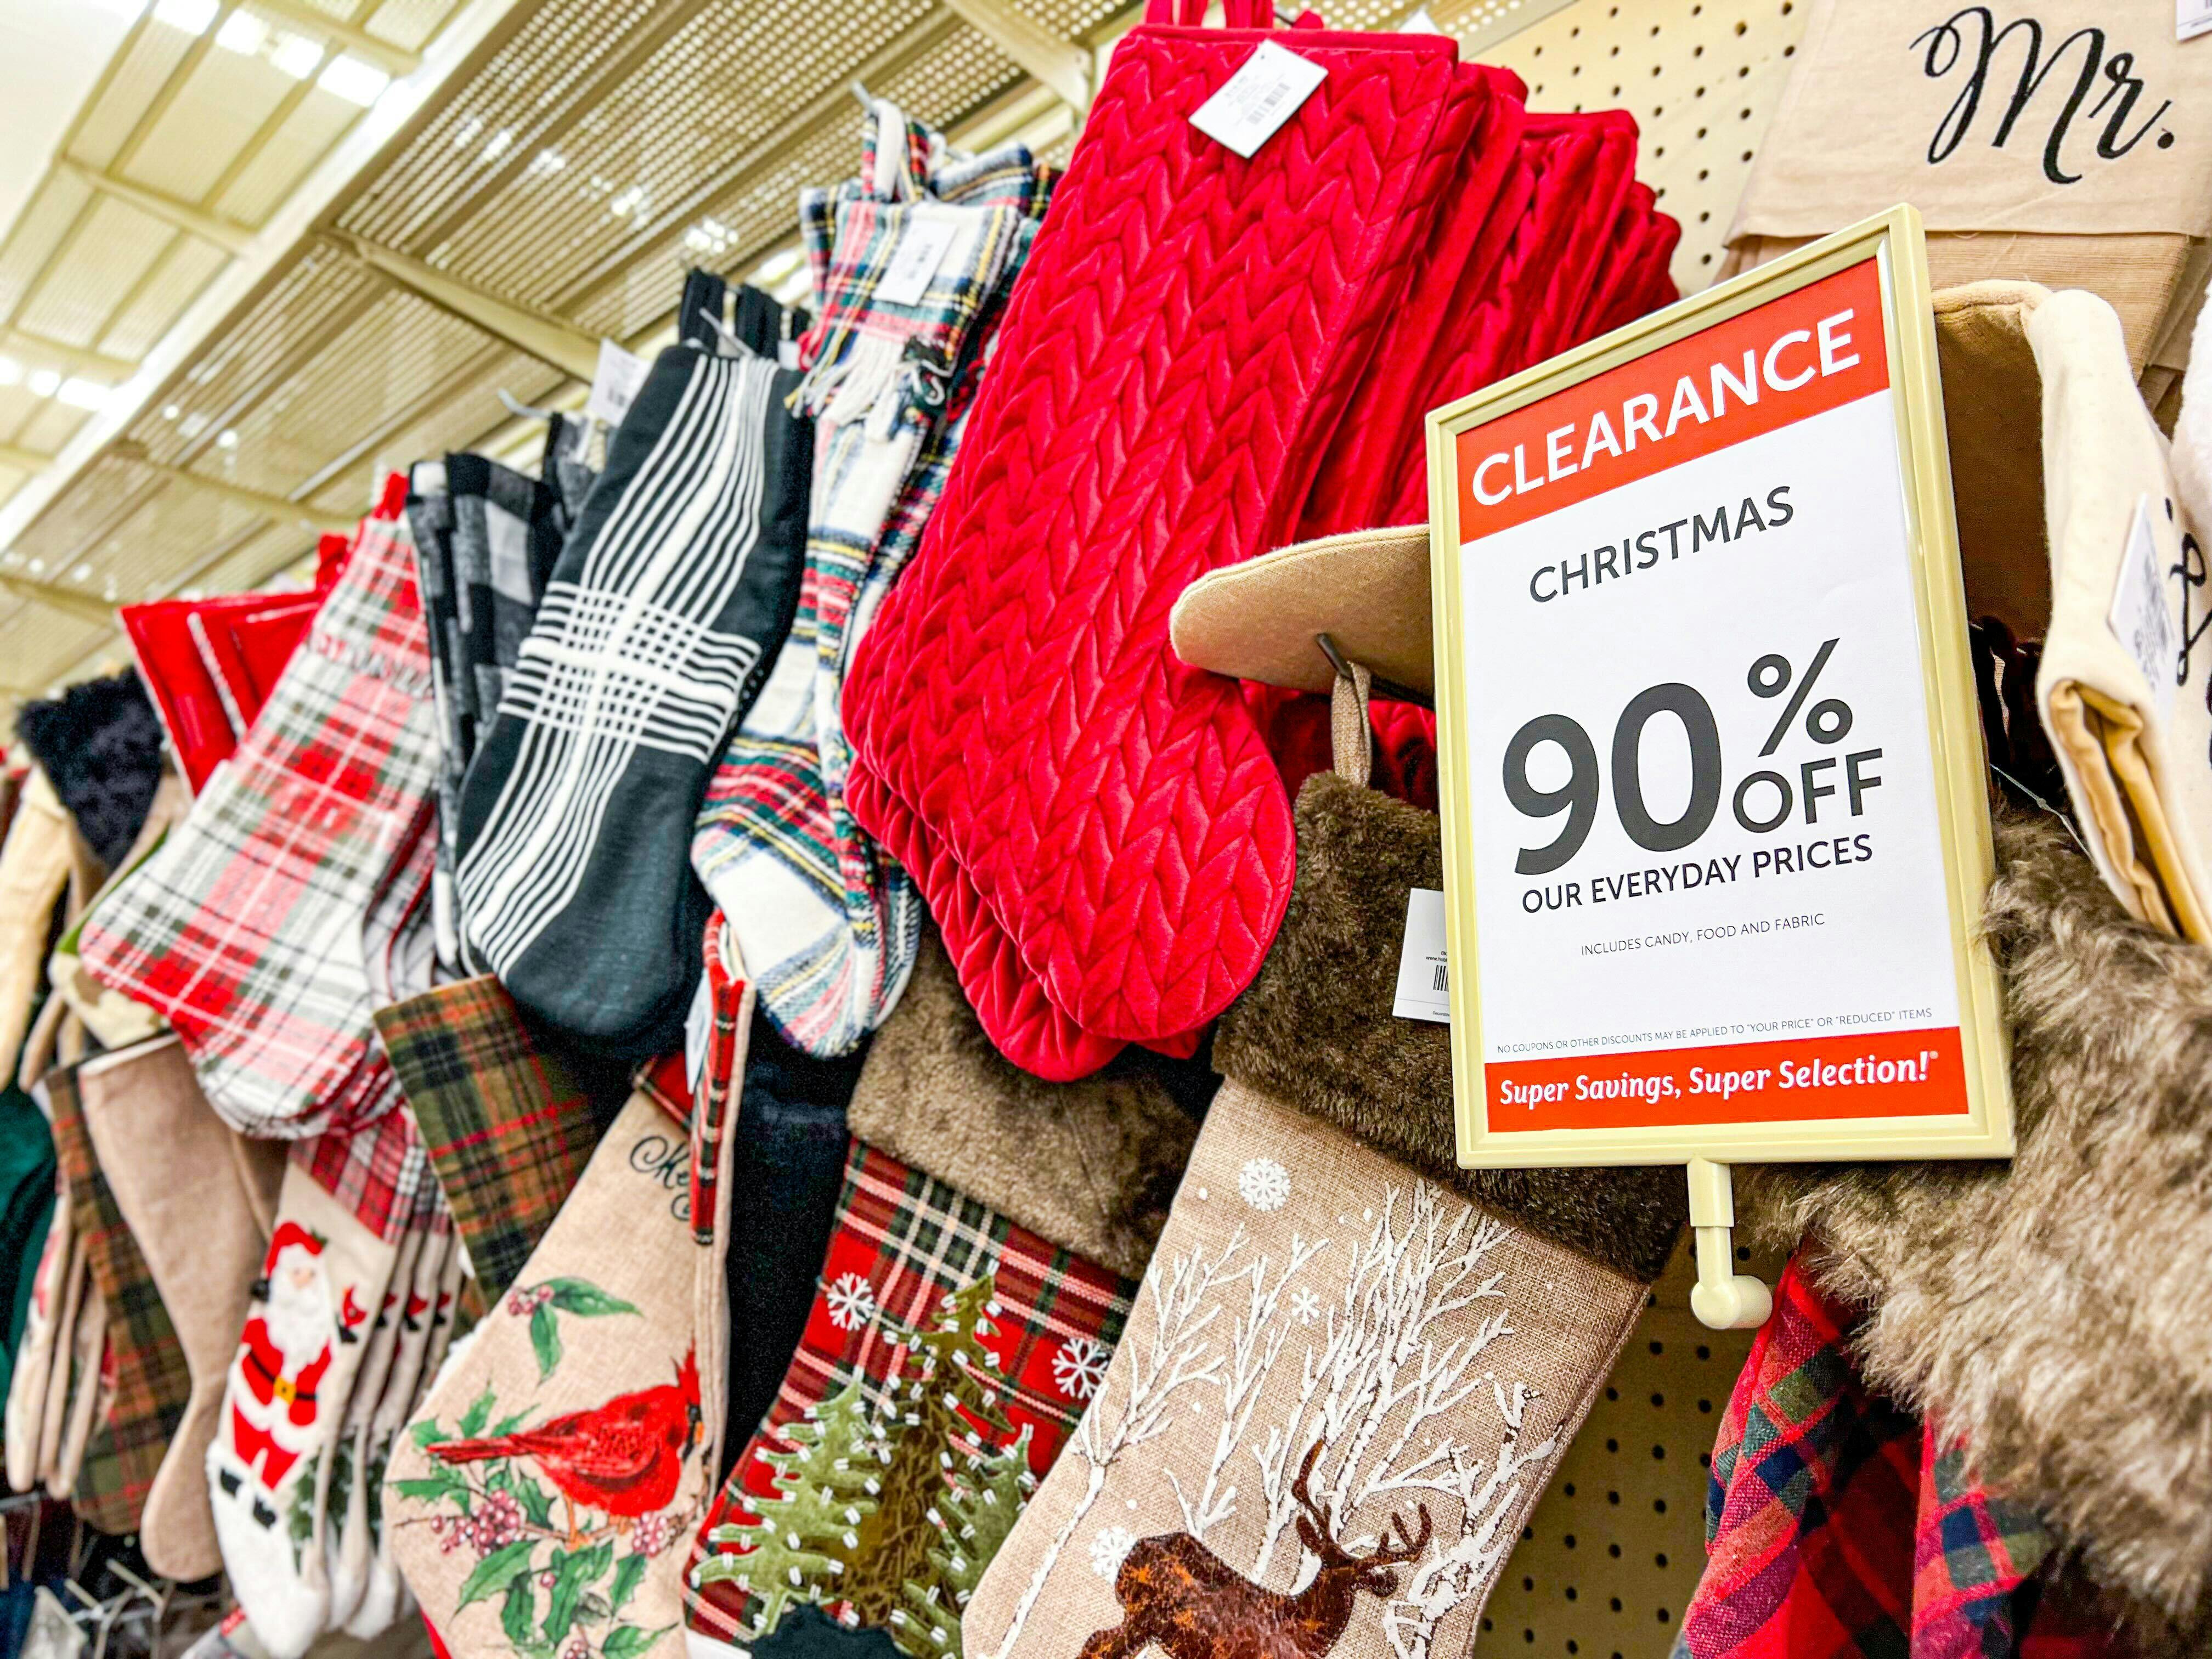 How to Get 90% Off During After Christmas Clearance Sales